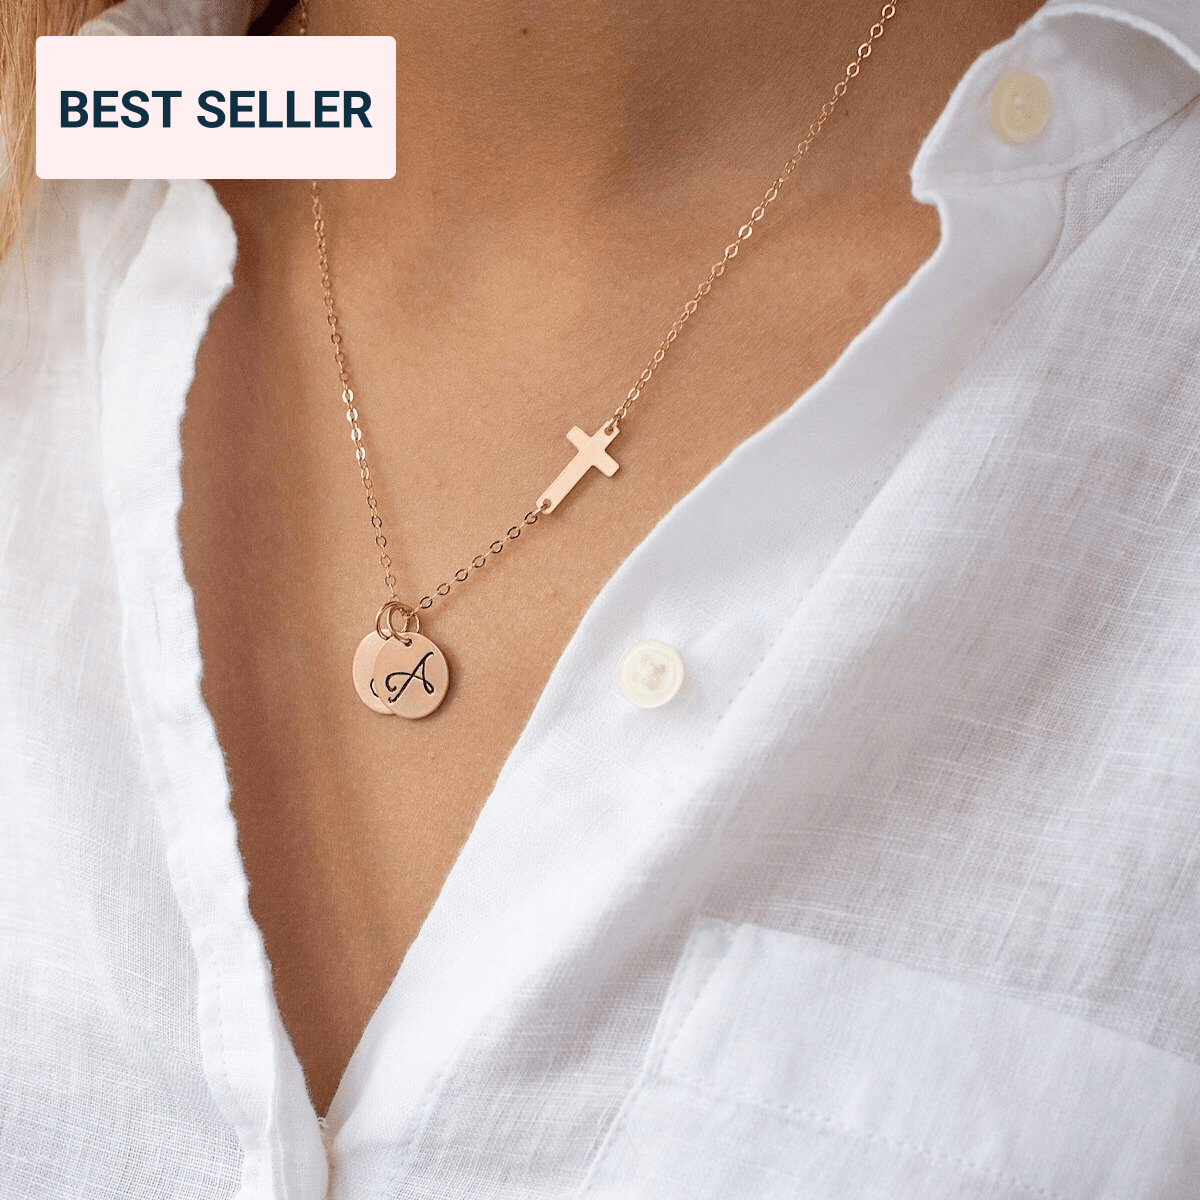 Personalized Small Sideways Cross and Circle Disc Charm Necklace, Initial  Round Tag Pendant Necklace, Religious Monogram Family Jewelry